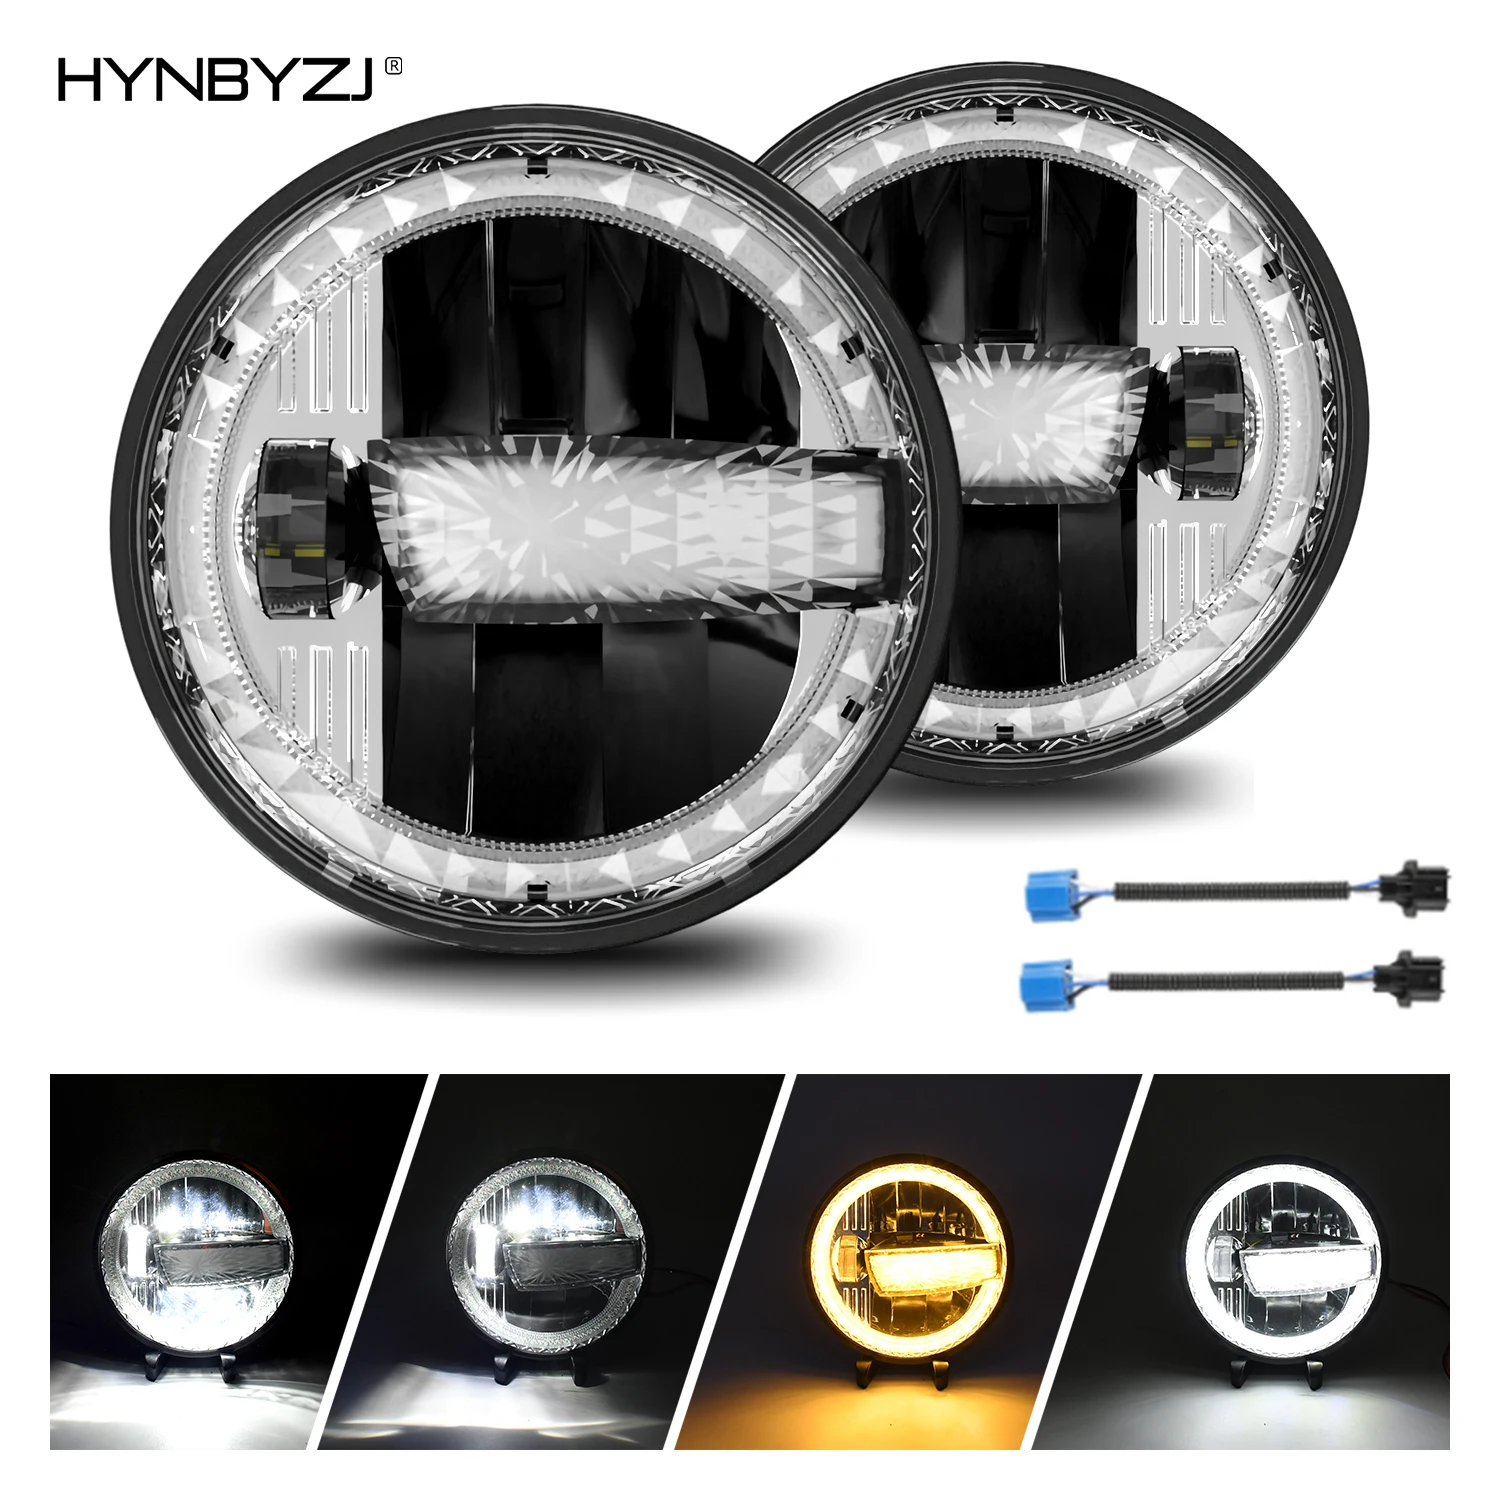 

HYNBYZJ 7 Inch 300W Round LED Headlamp Automatic Turning Changes Motorcycle Headlights Fit For Harley Davidson For Jeep Wrangler